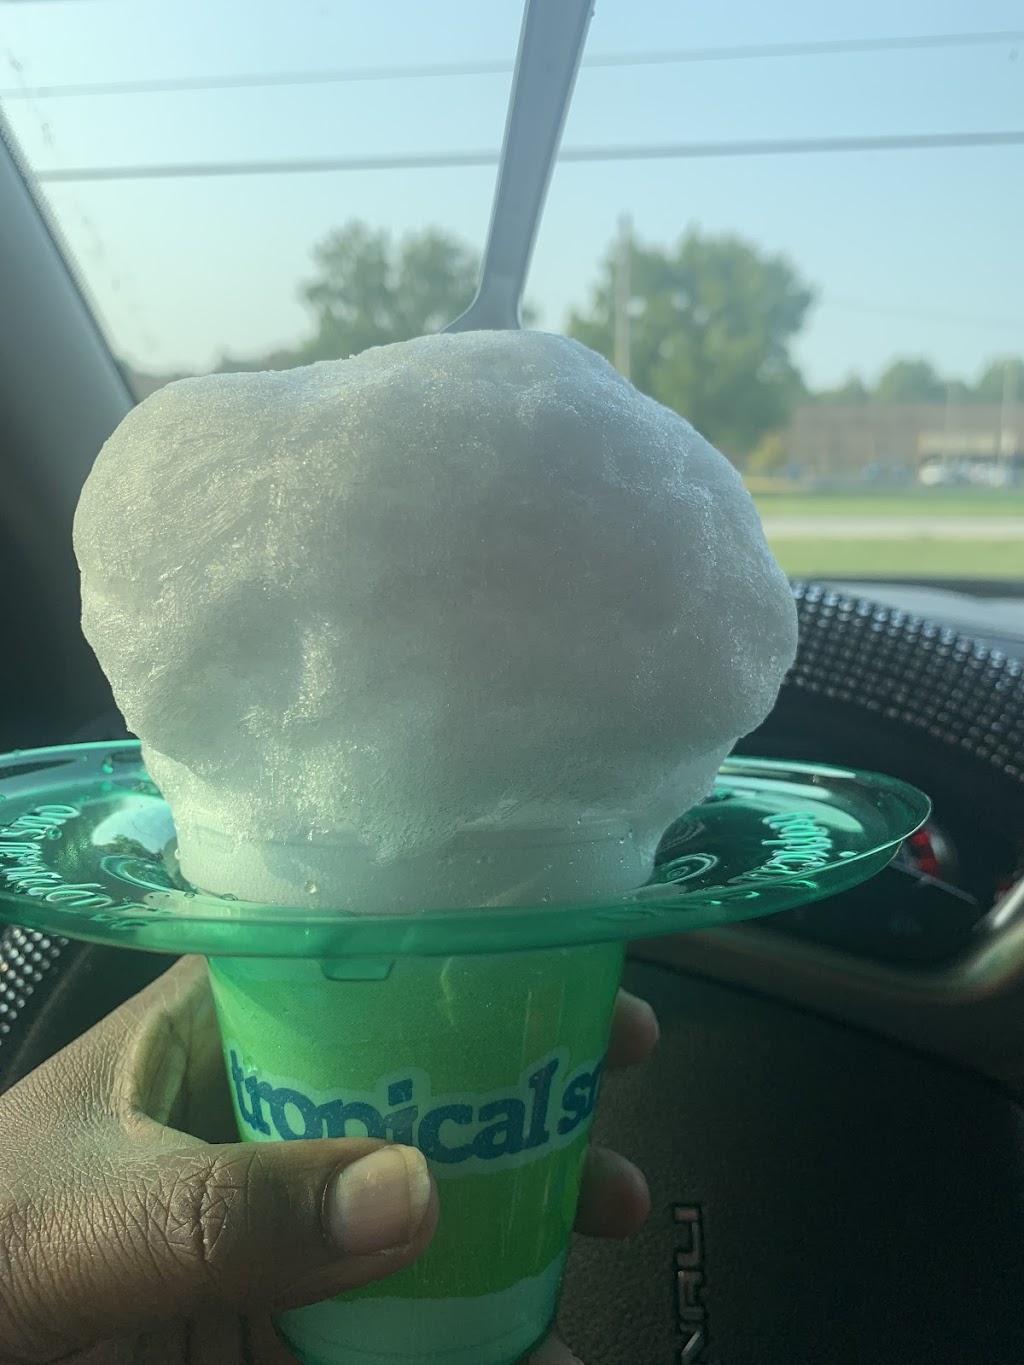 Tropical Sno Shaved Ice | 2134 S Morrison Ave, Caseyville, IL 62232, USA | Phone: (618) 593-5683